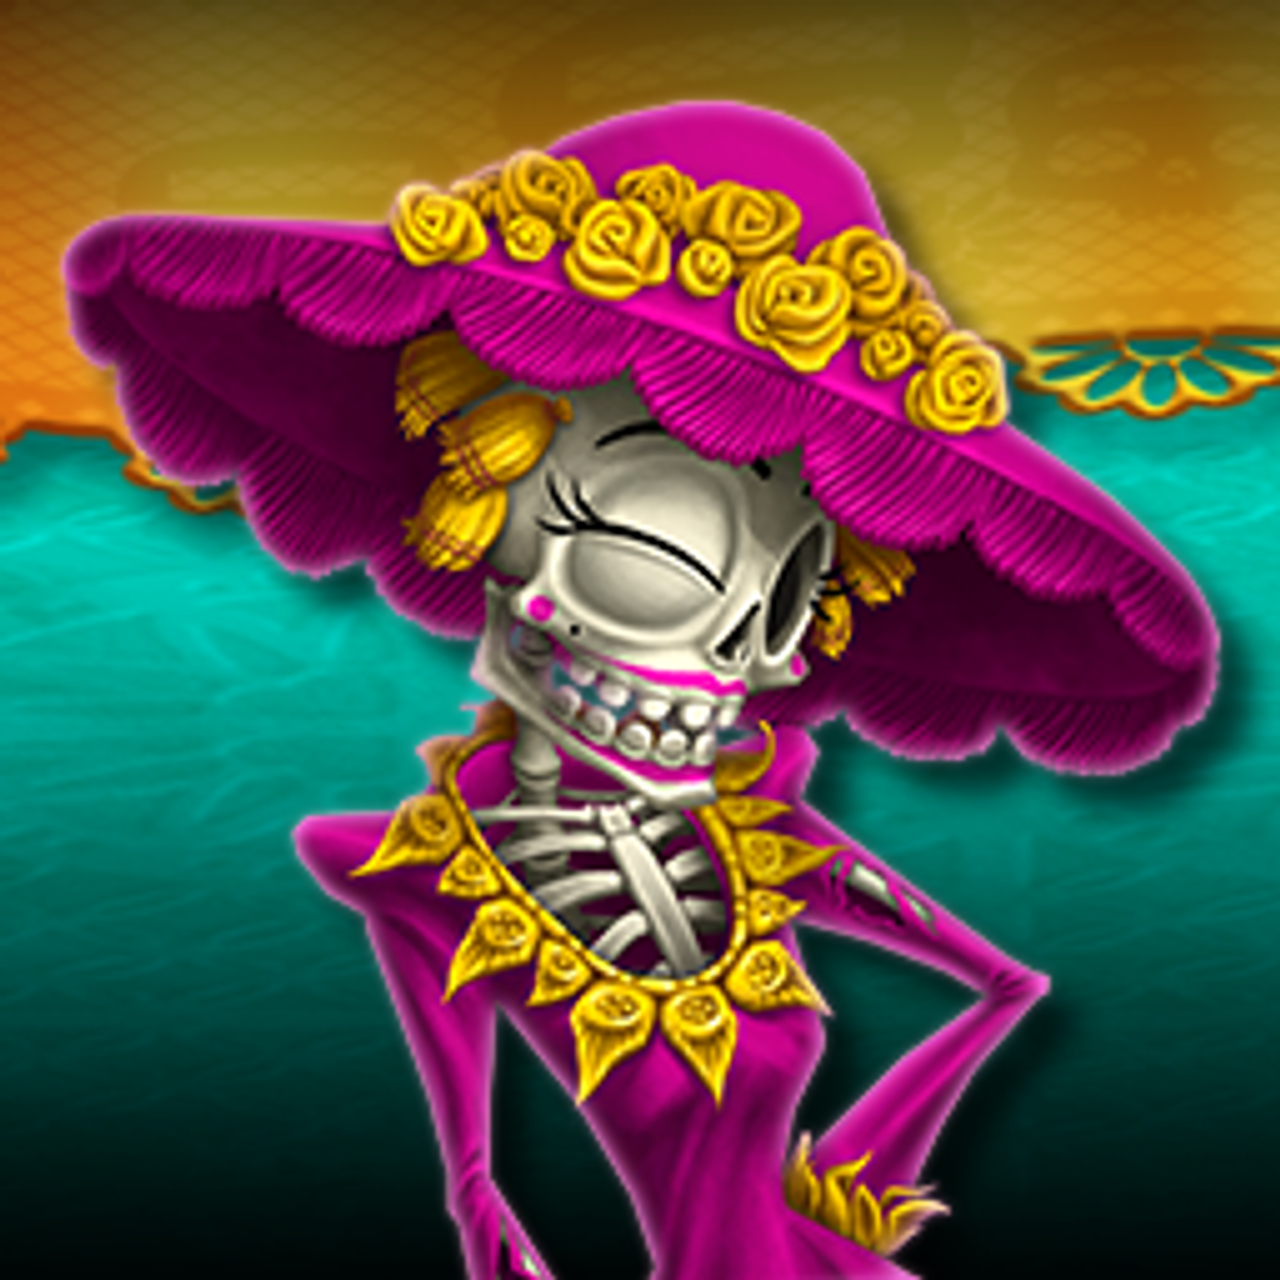 IGT Slots Day of the Dead